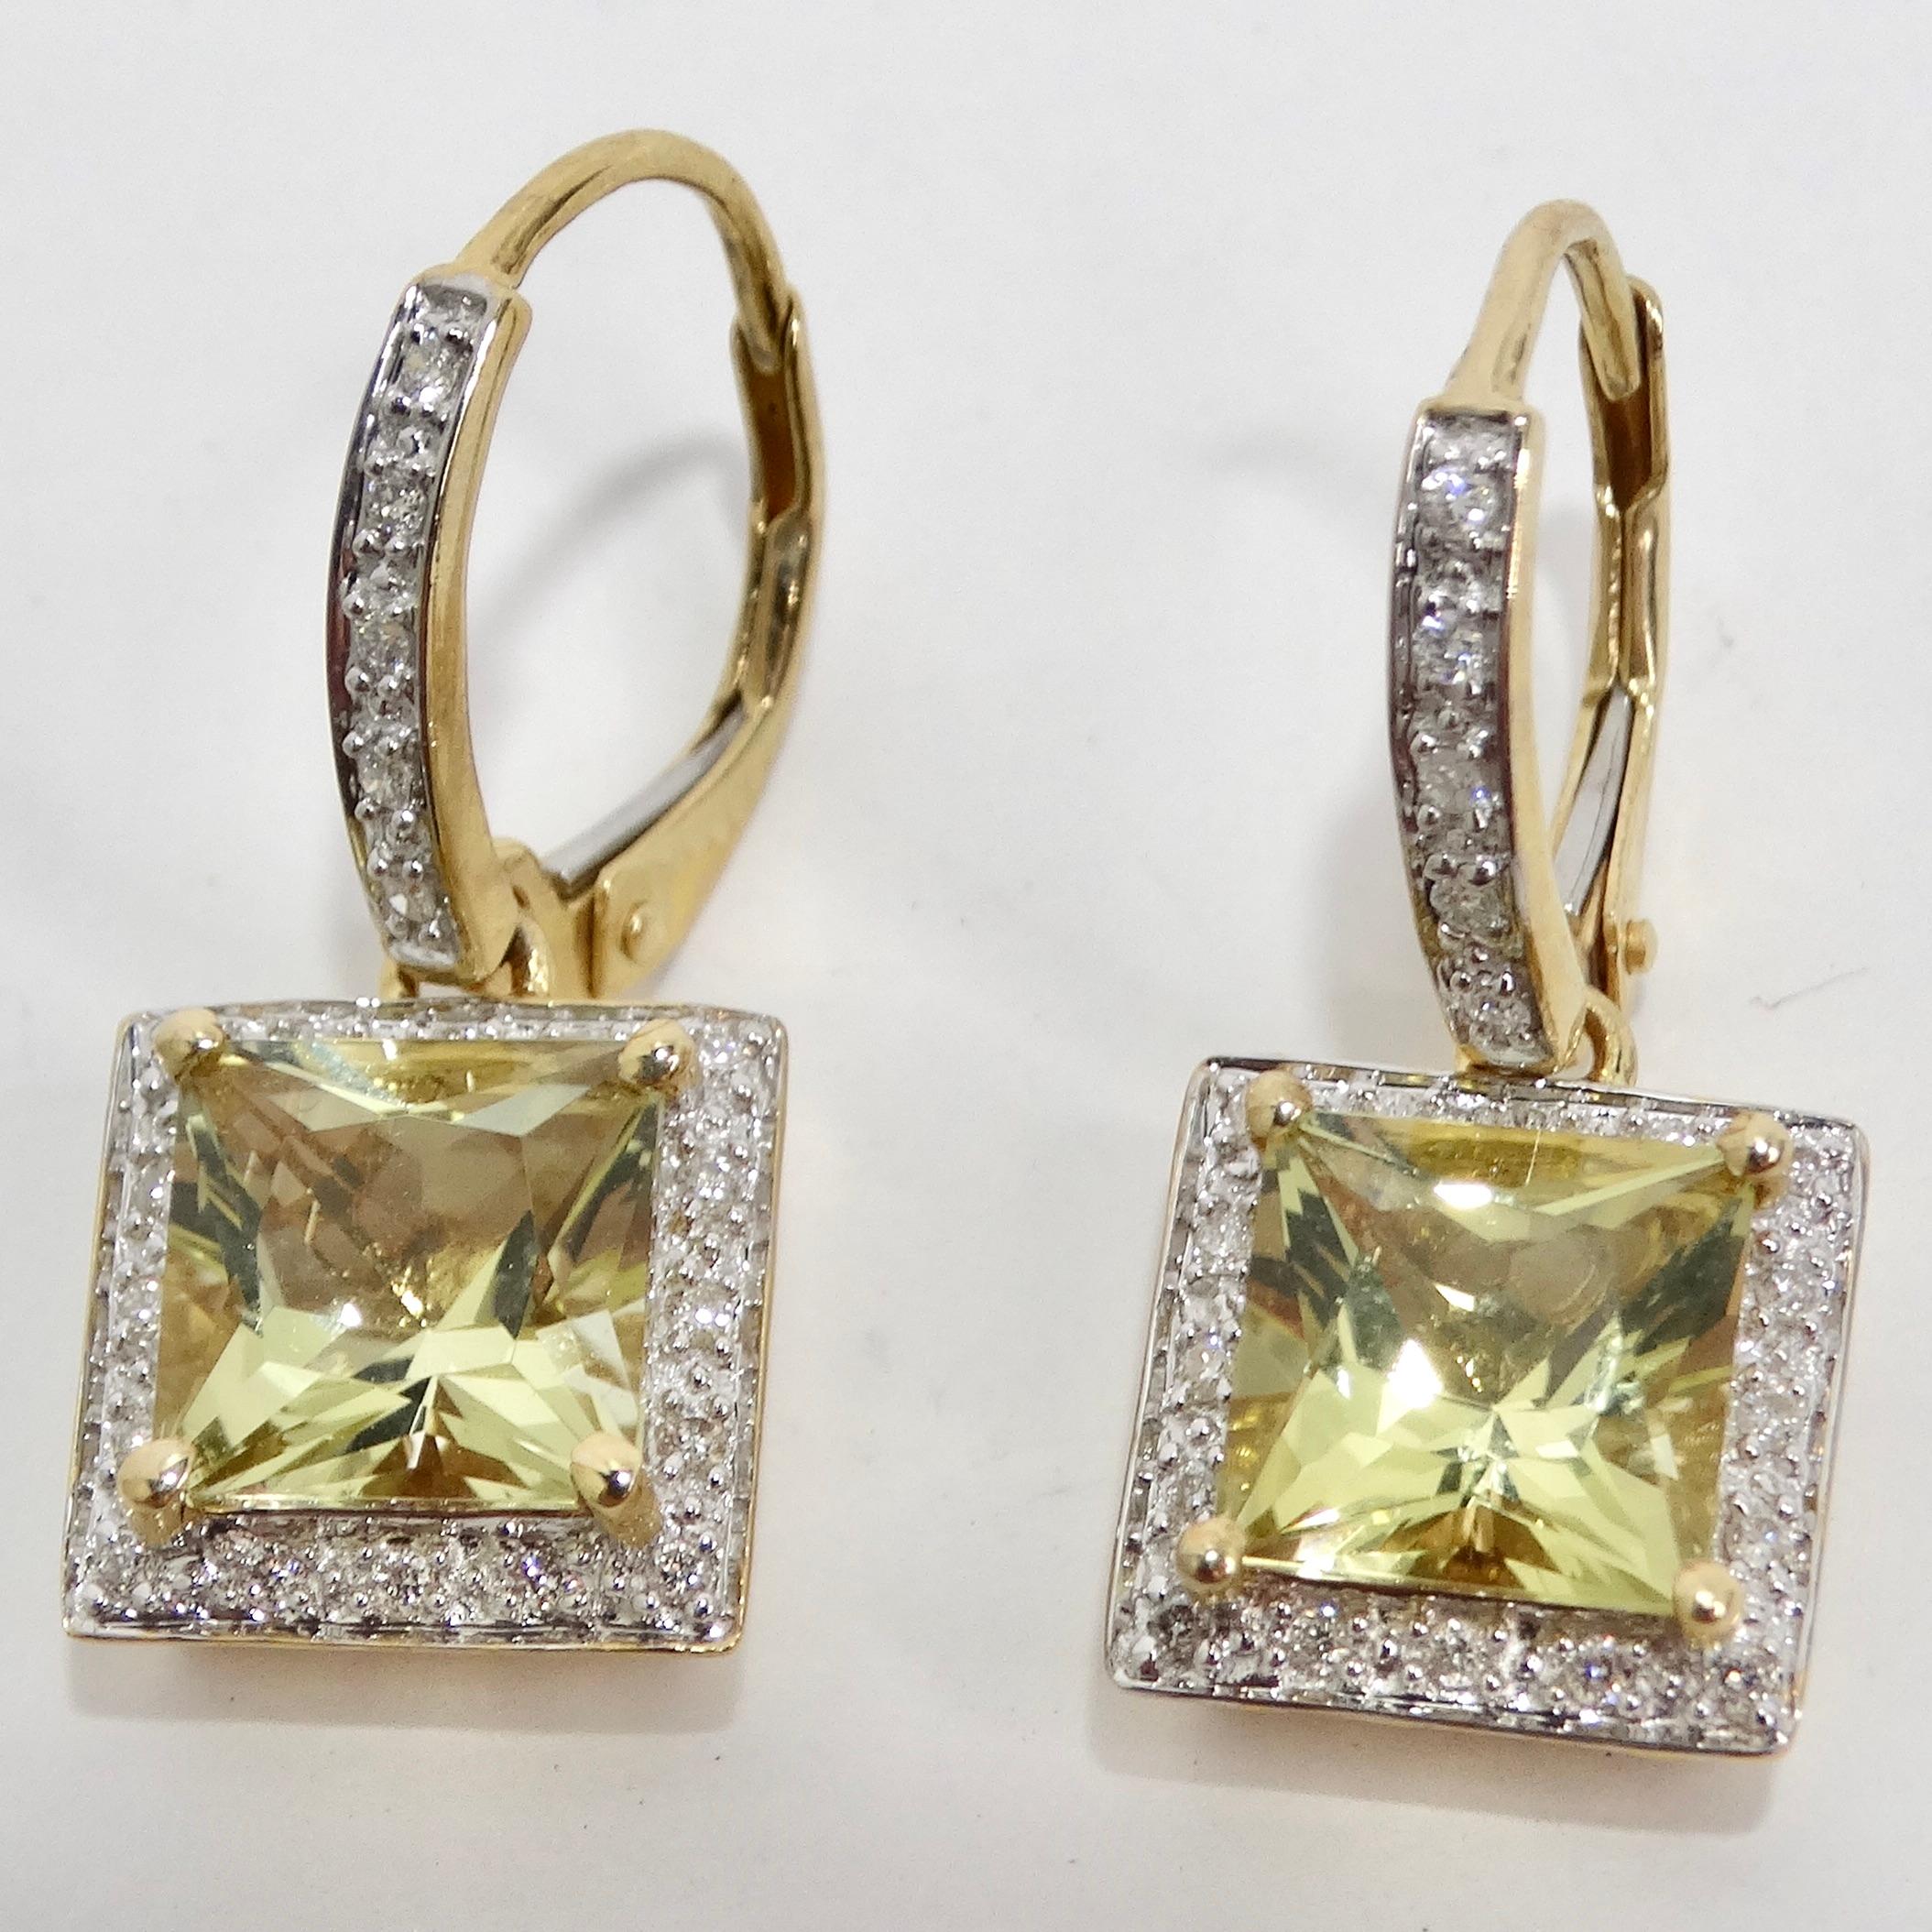 Introducing the 14K Gold Citrine Diamond Earrings - A Timeless Classic with a Subtle Touch of Vintage Glamour! These 14K gold dangle stud earrings feature a square citrine stone at the center, exuding elegance and grace. The citrine stones in each